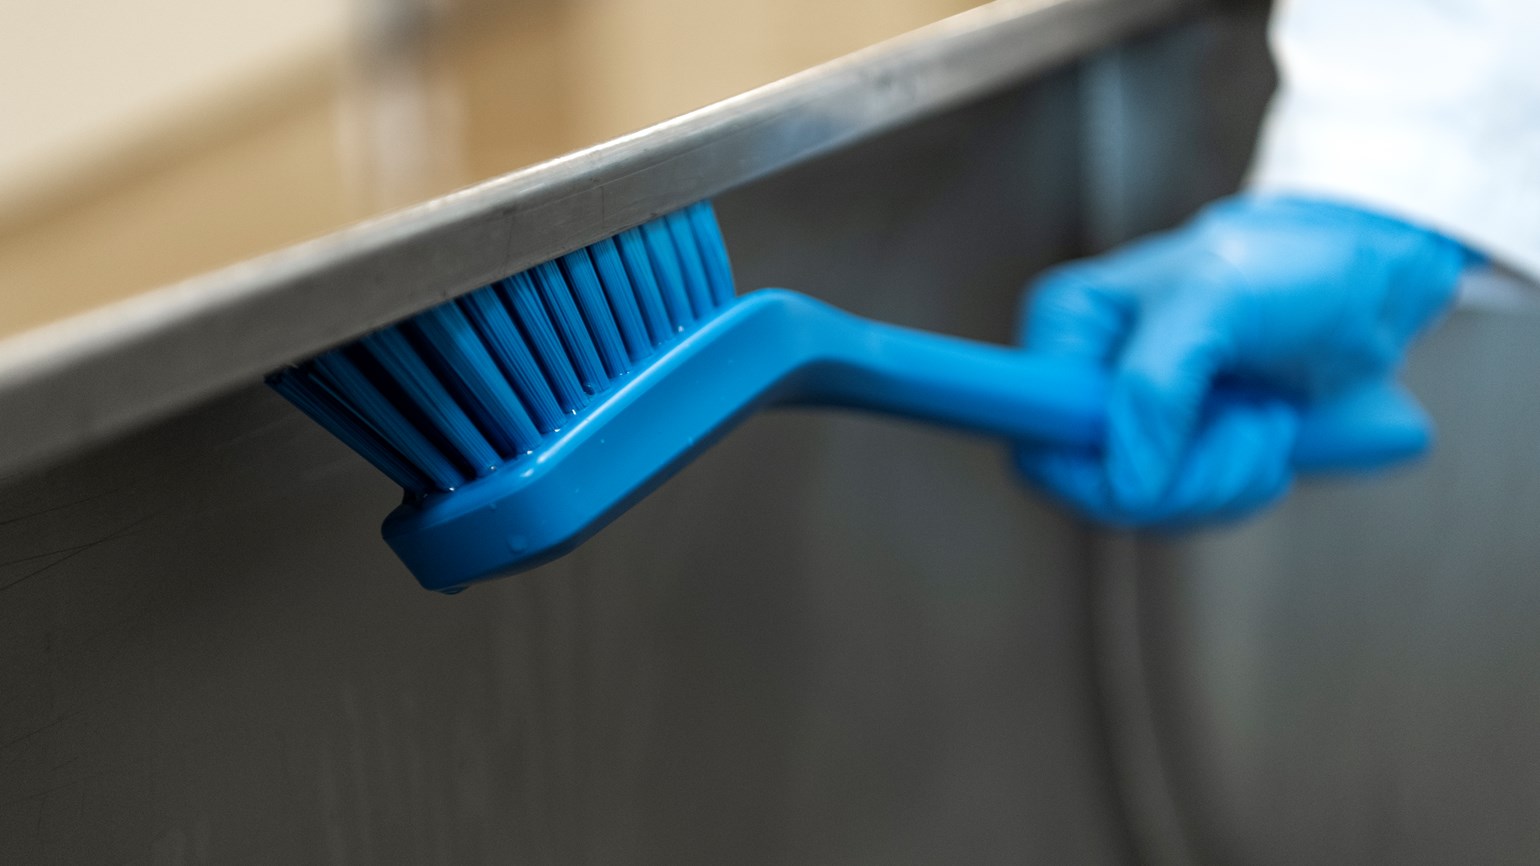 Sector Insight: Household cleaners